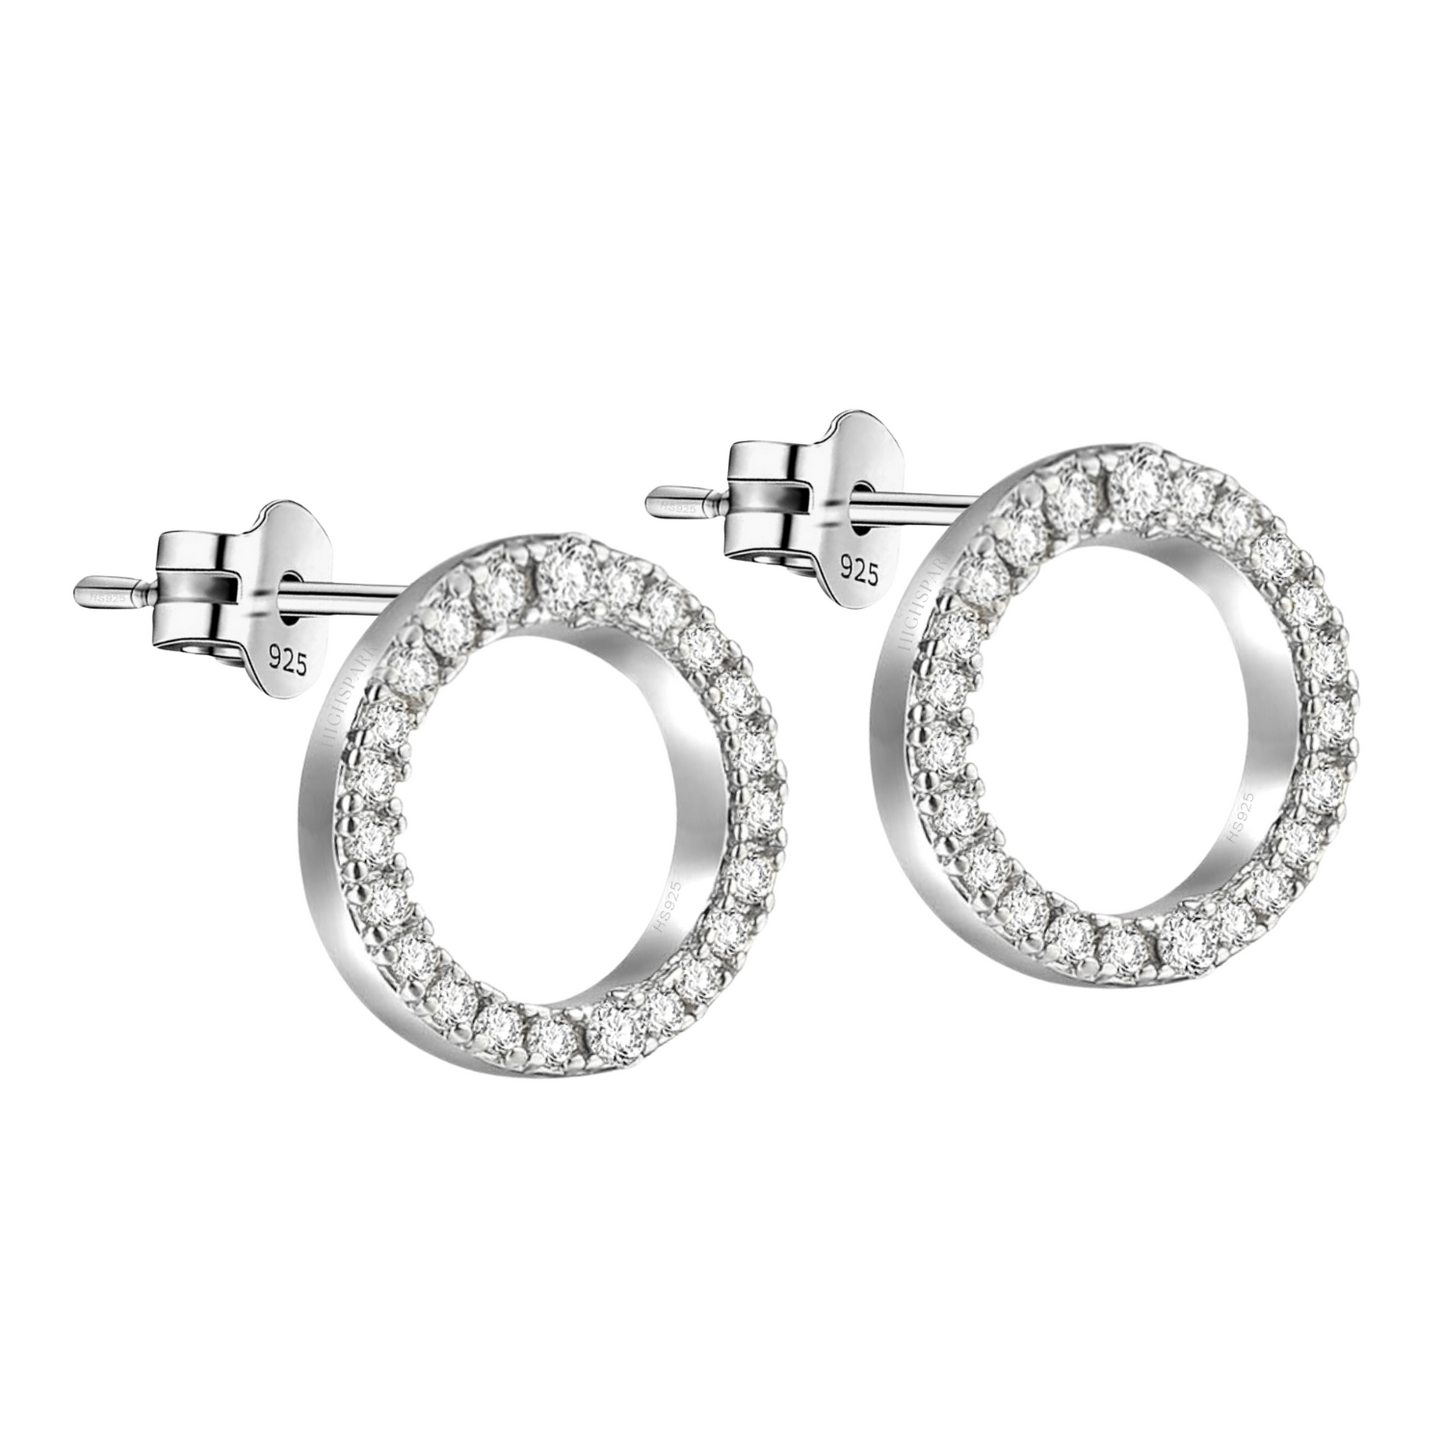 Circle of Life Earrings - 92.5 Silver - Celebrity  Earrings - Unity, Wholeness and Completeness